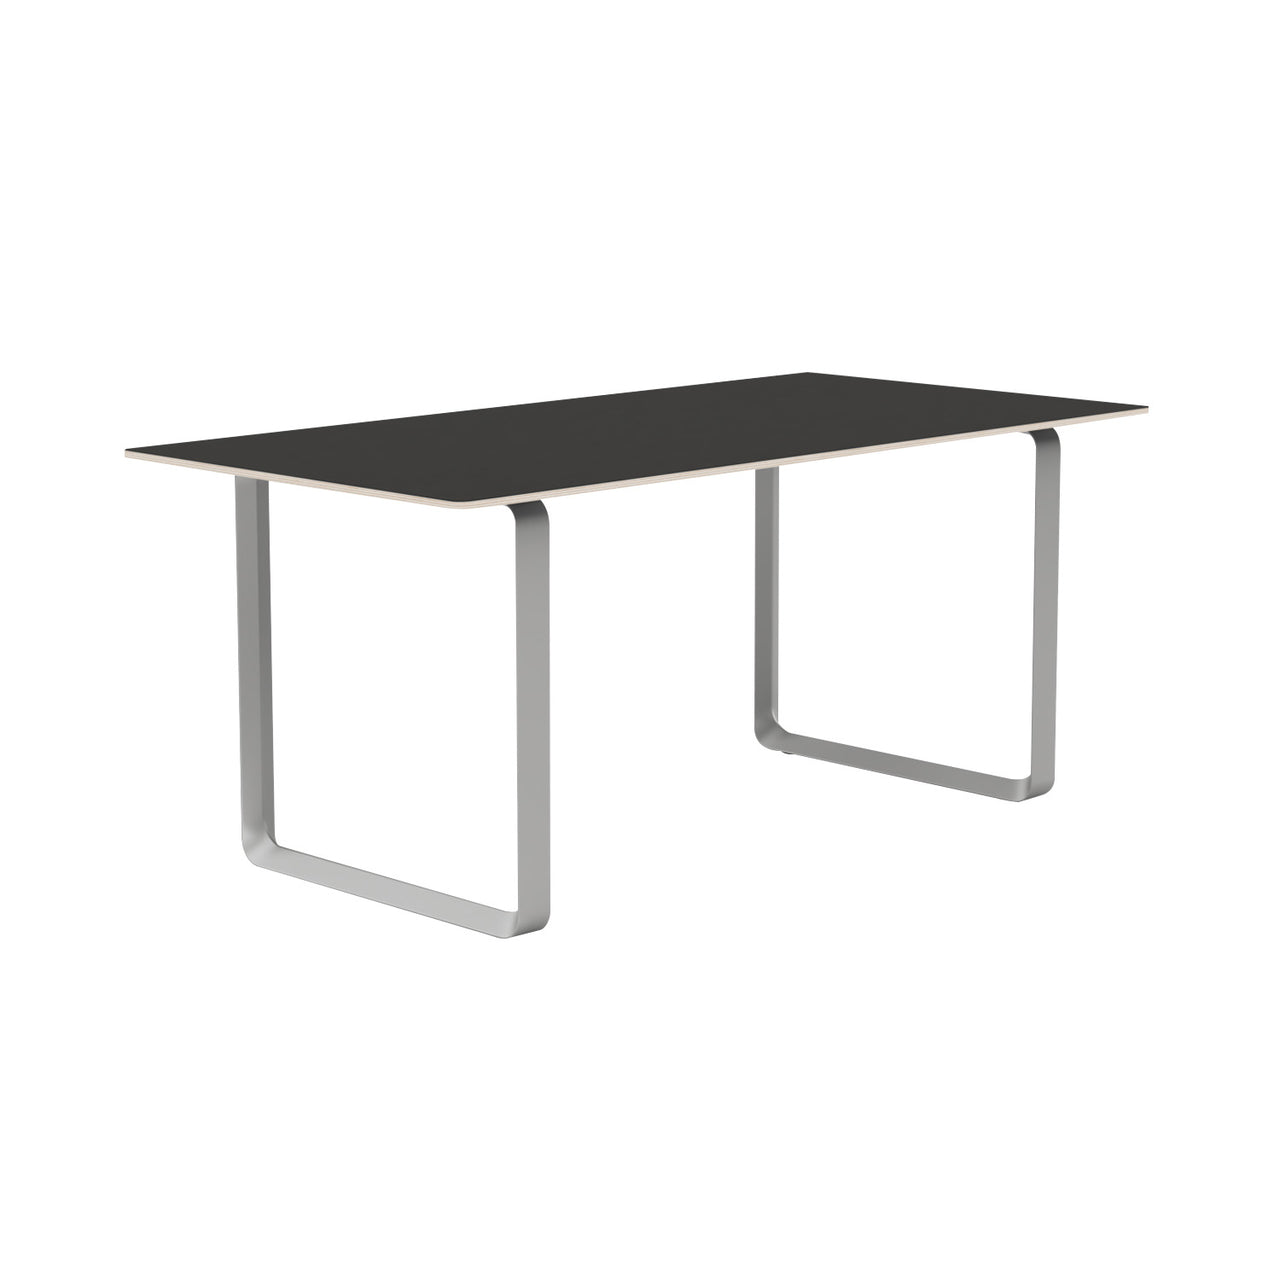 70/70 Table: Small